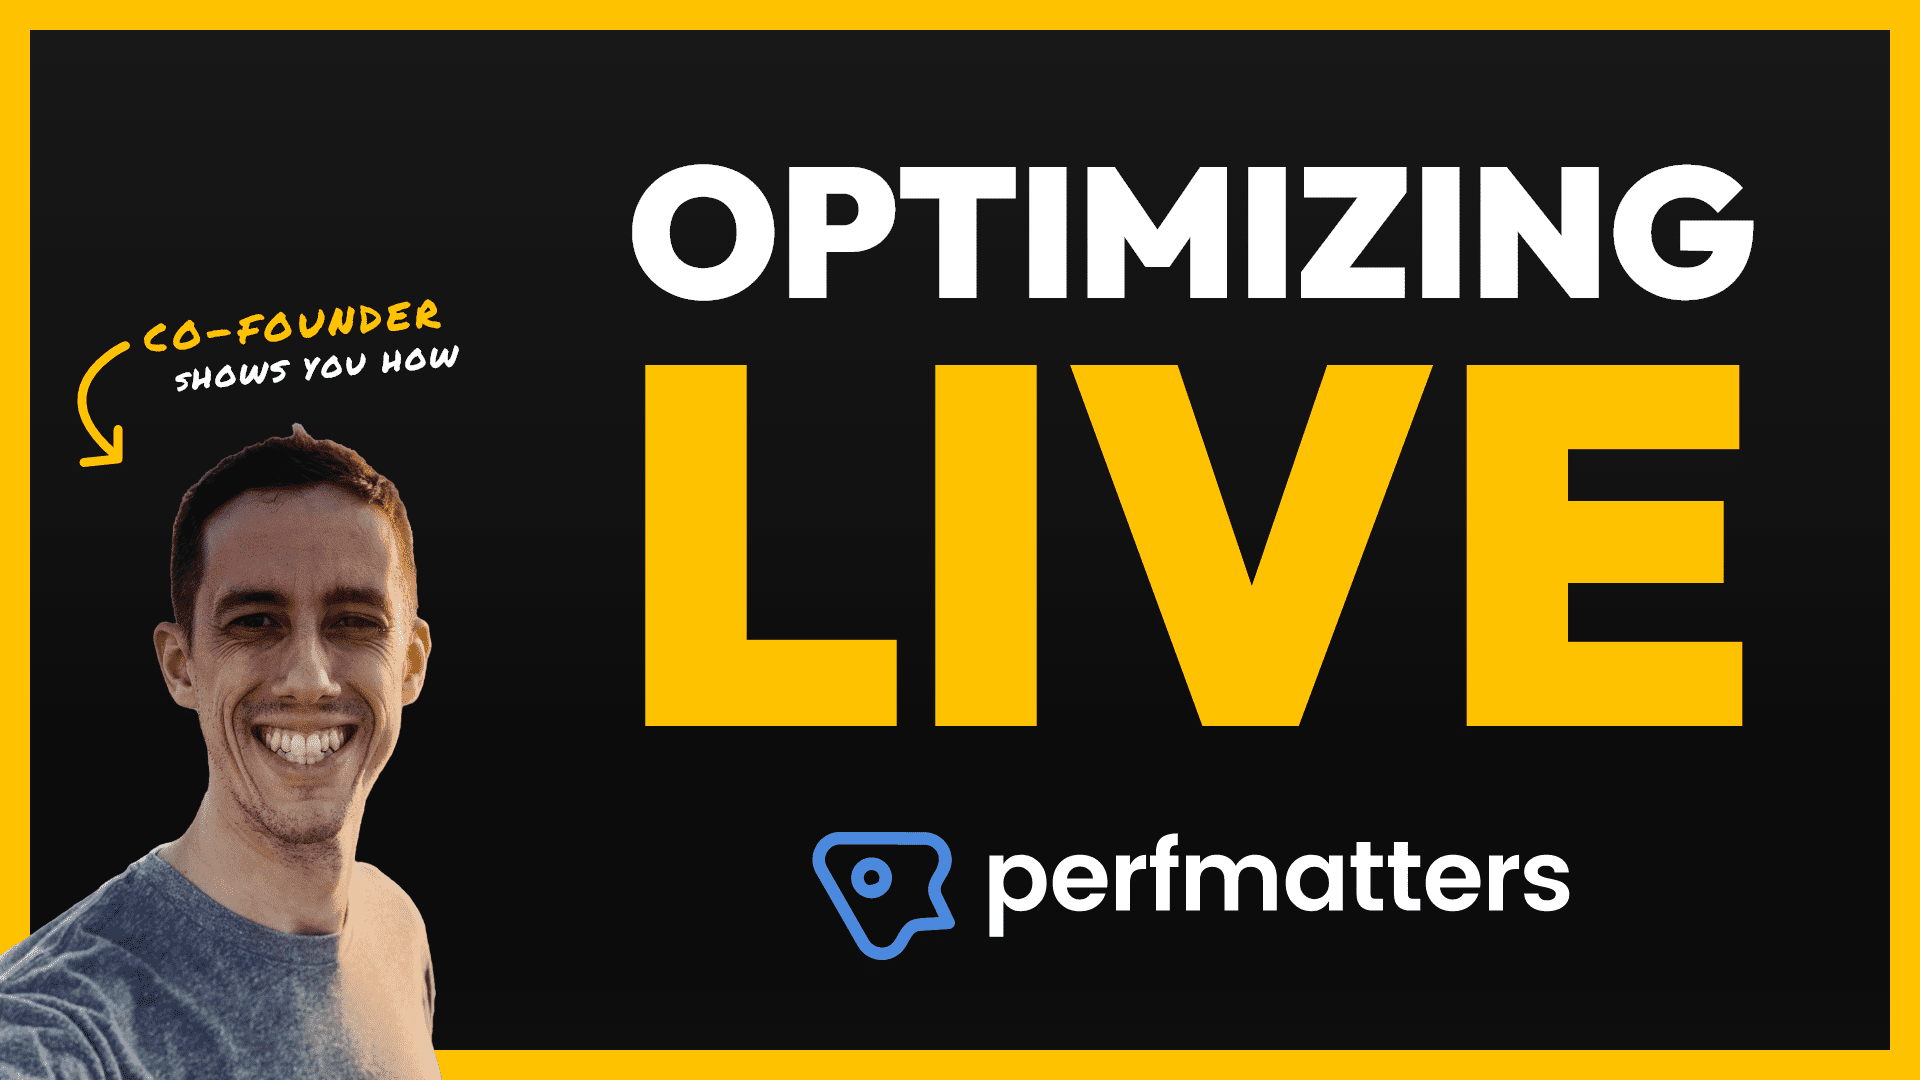 Optimizing live with Brian Jackson from Perfmatters